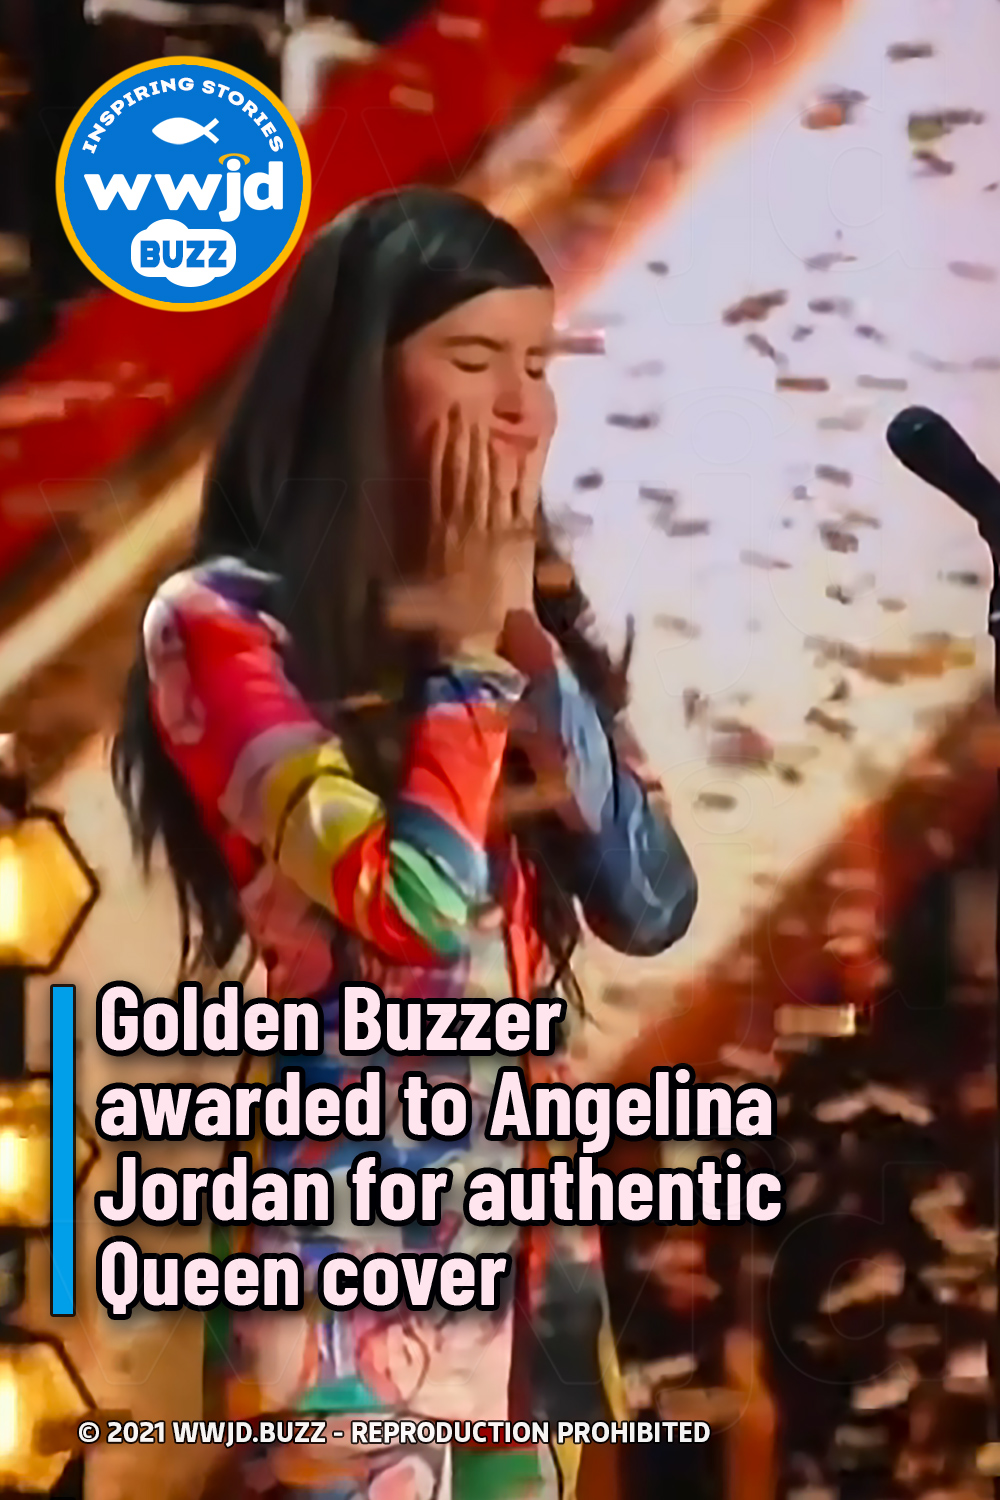 Golden Buzzer awarded to Angelina Jordan for authentic Queen cover